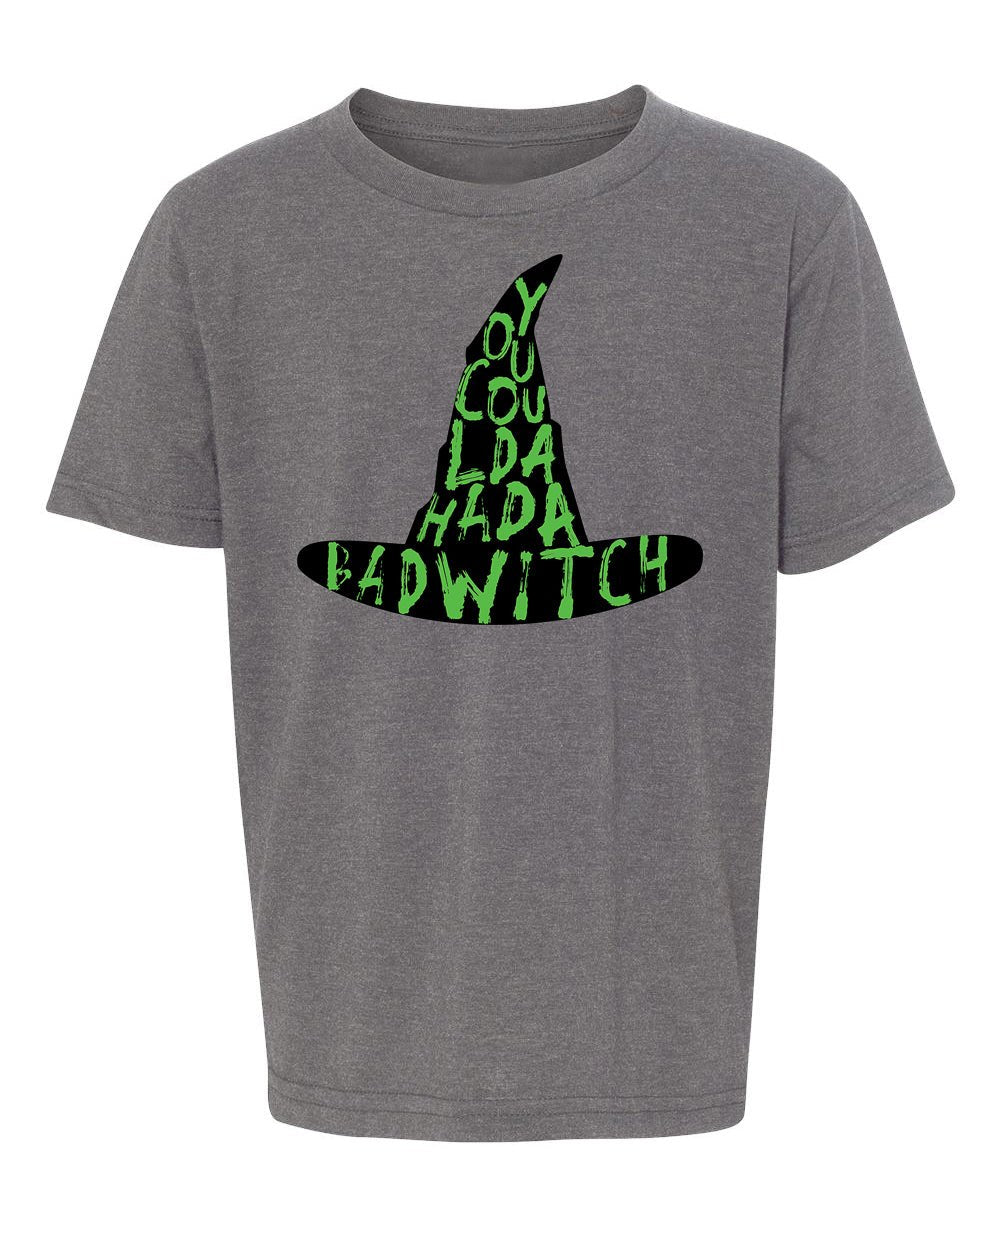 You Coulda Had a Bad Witch Kids Halloween T Shirts - Mato & Hash